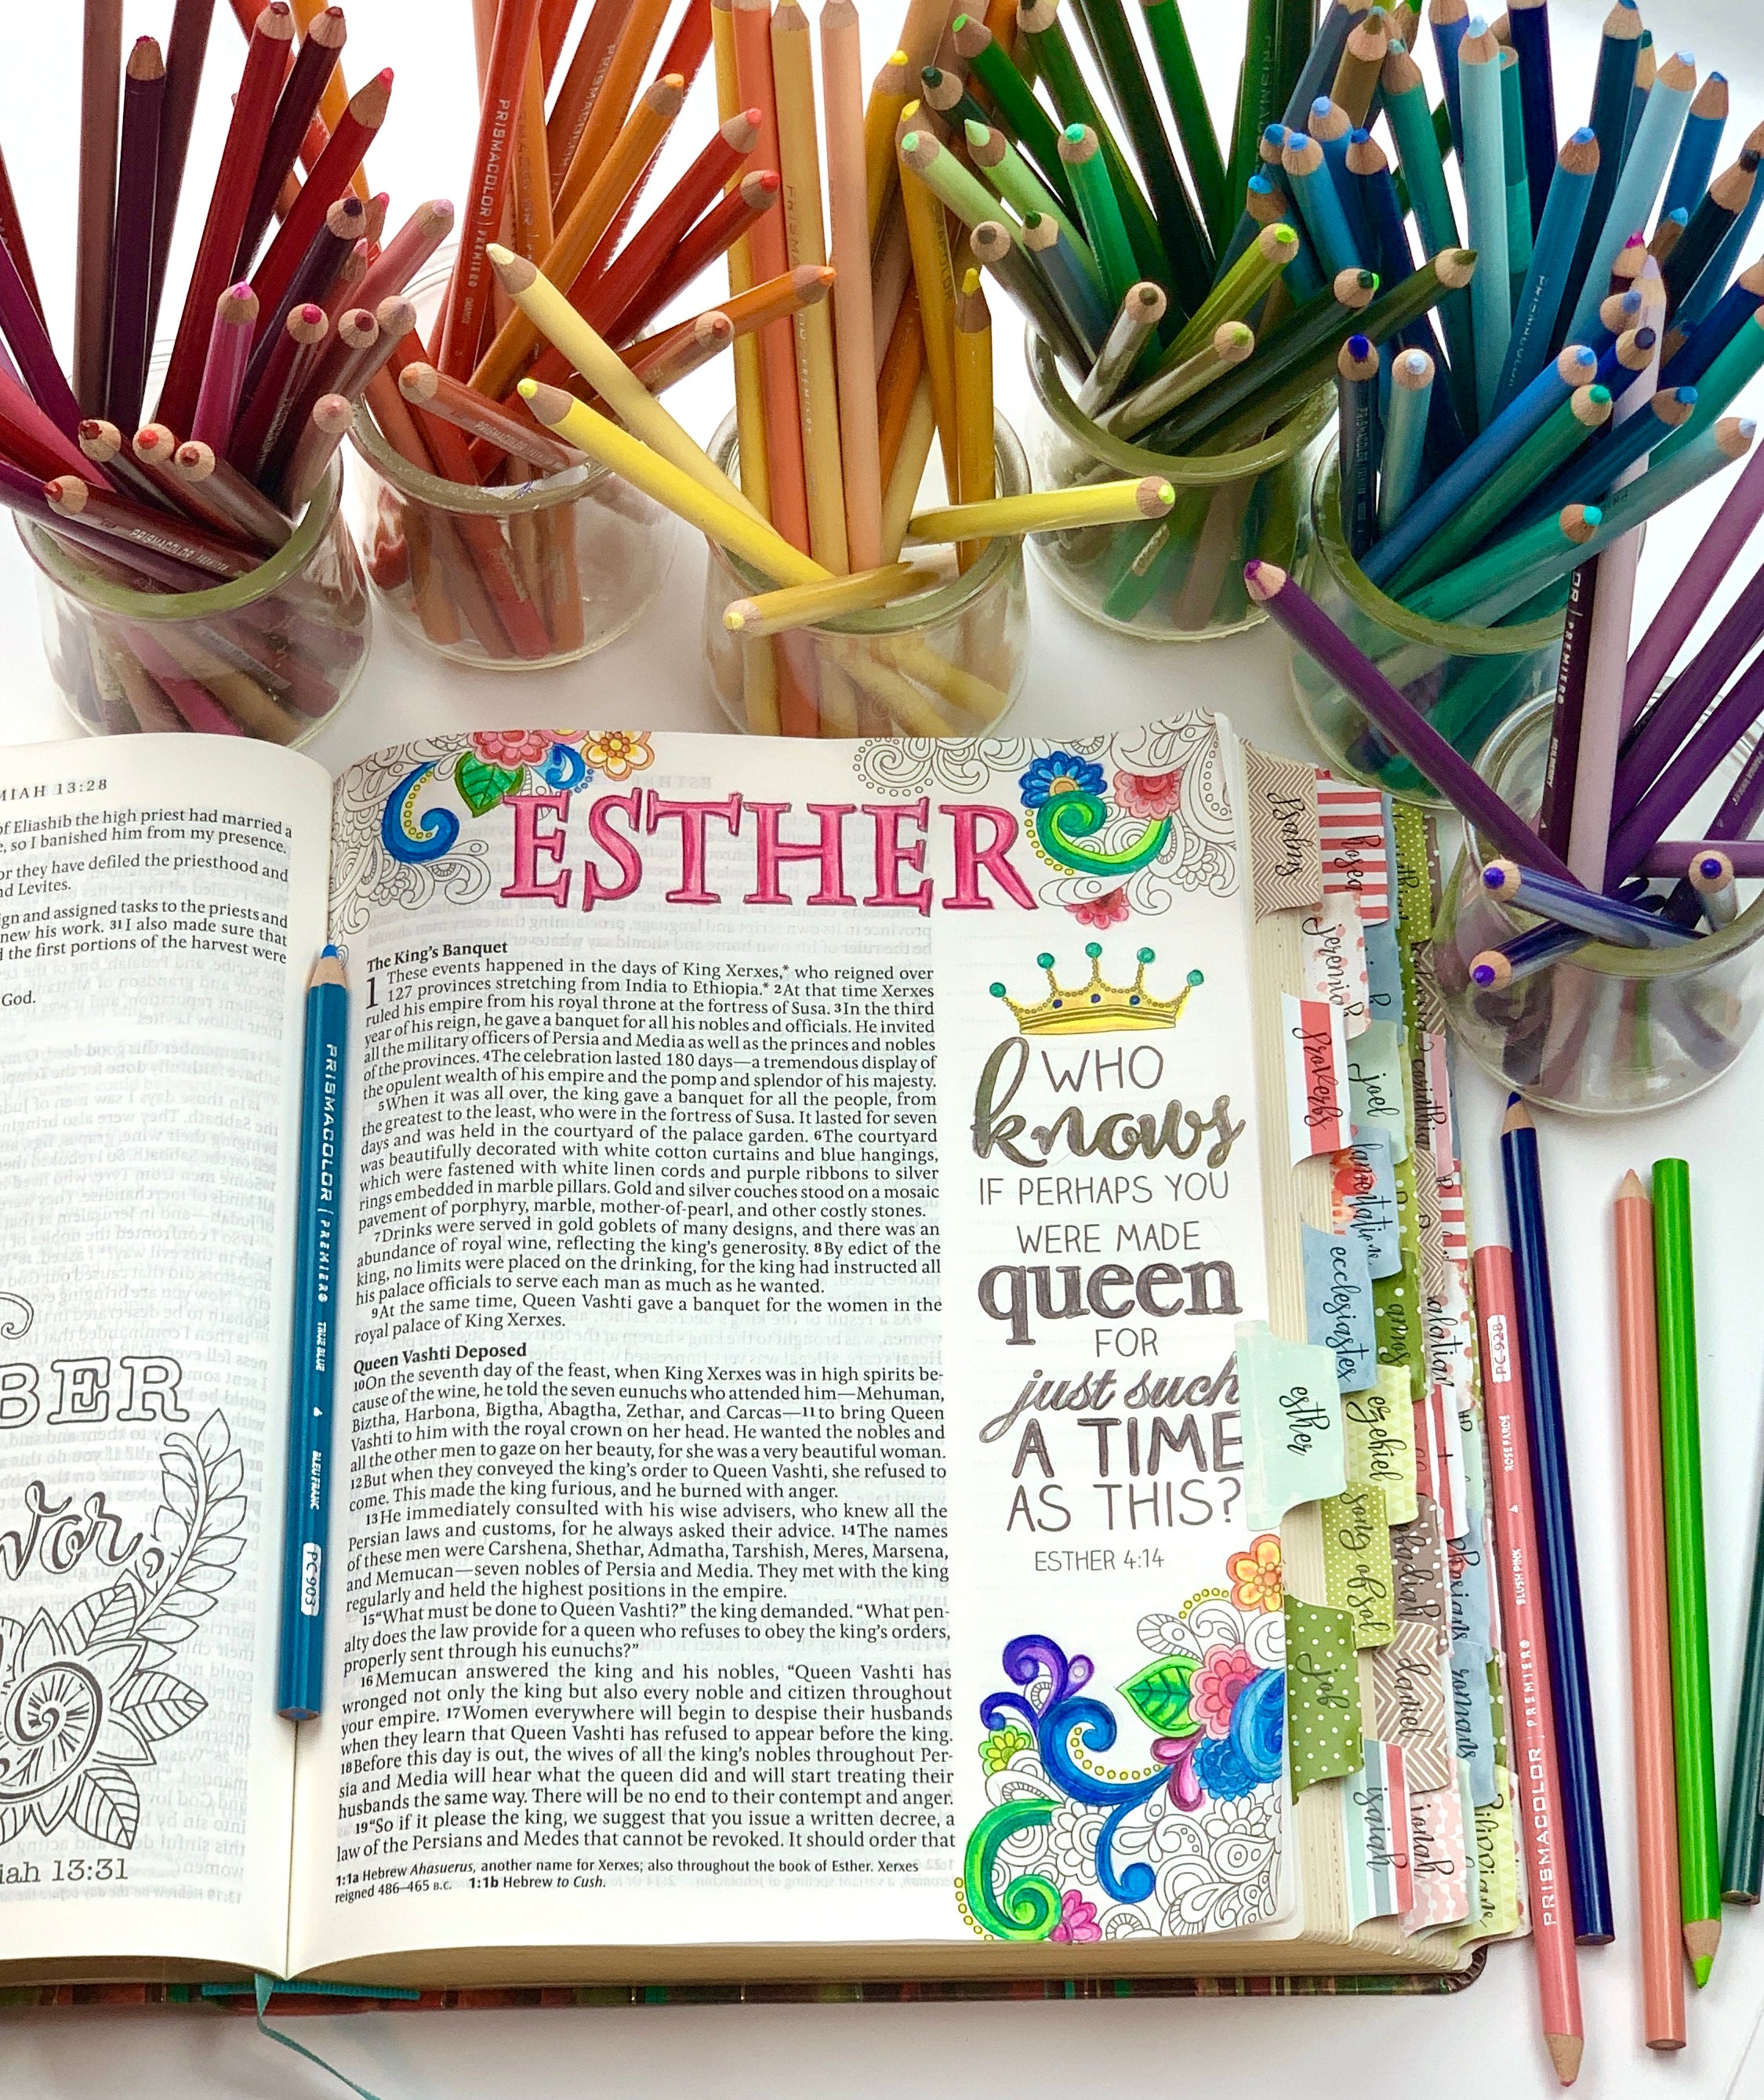 Our Favorite Bible Journaling Supplies – Bible Study Collective